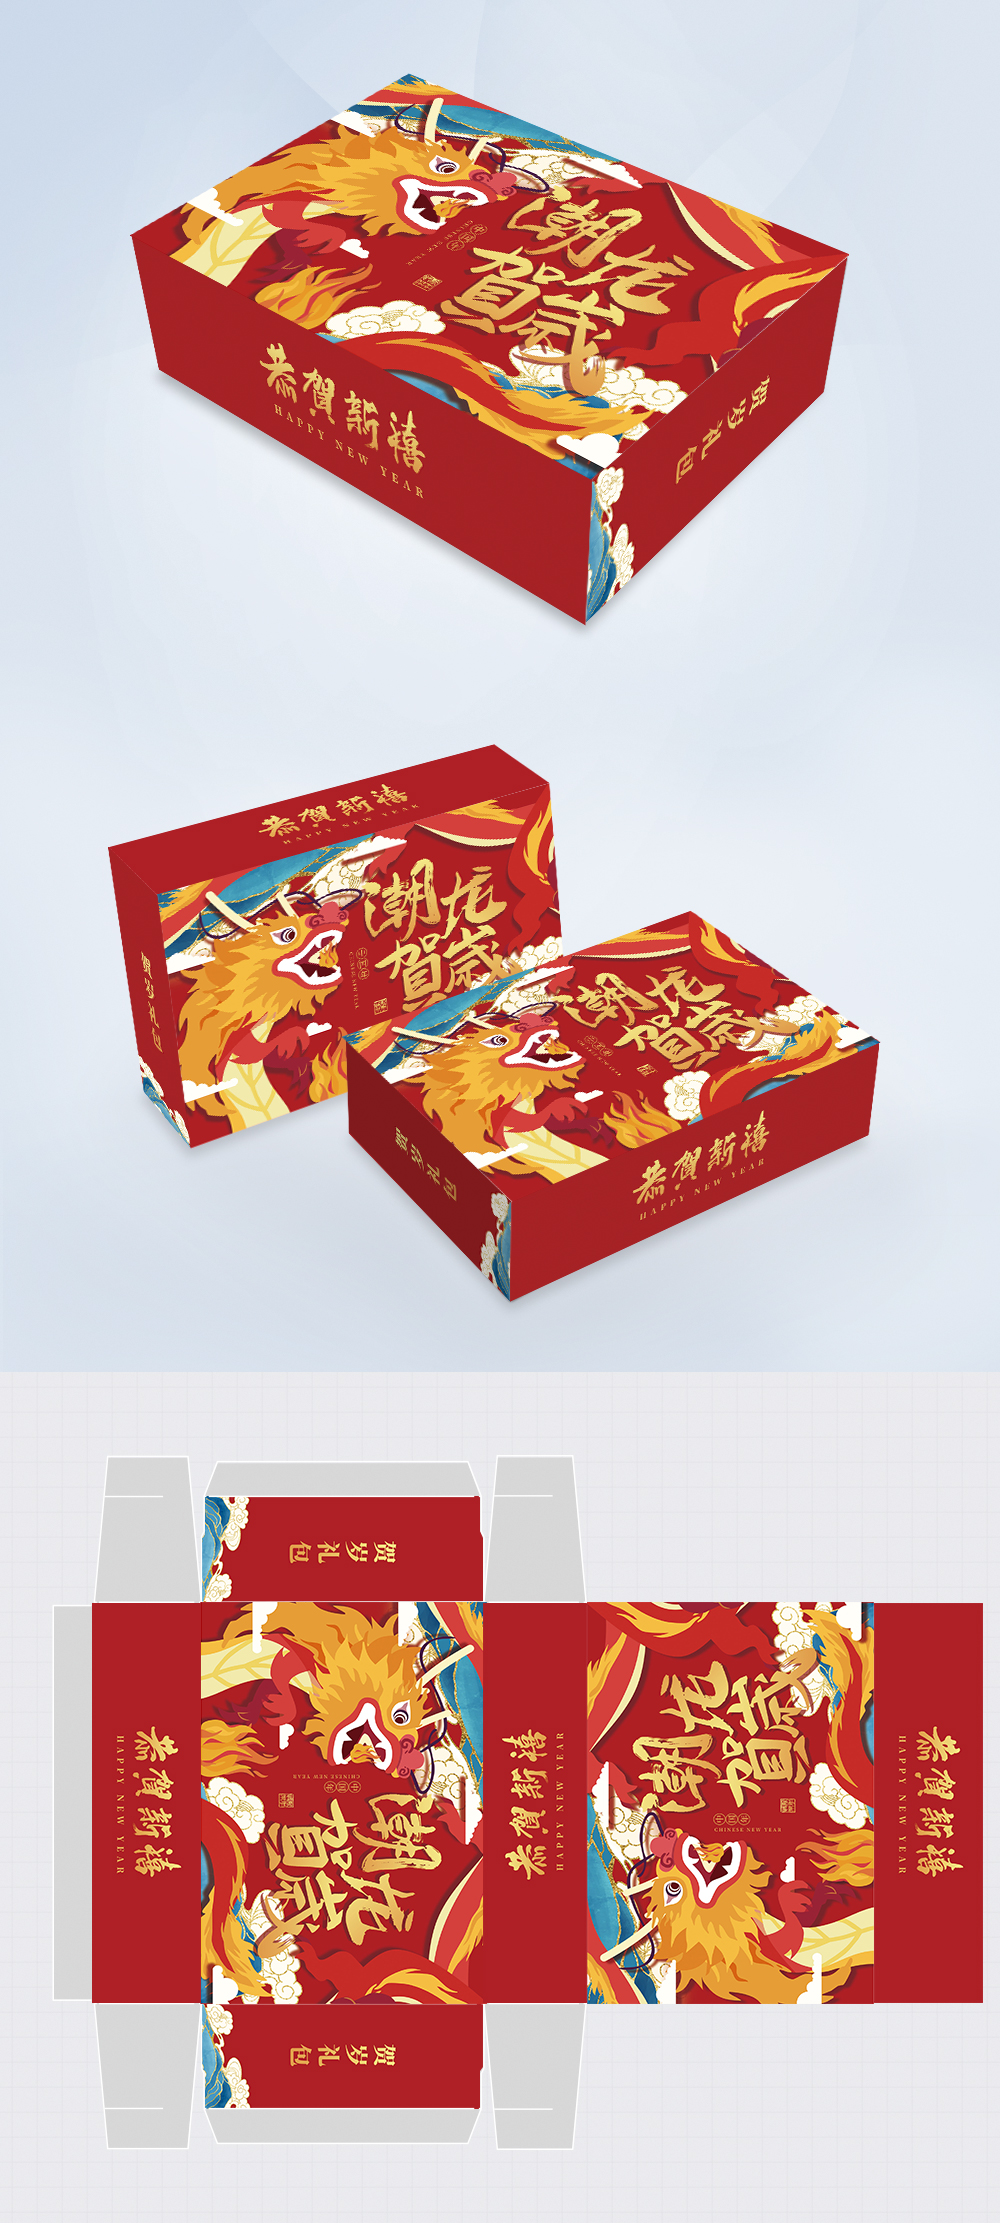 Red premium chaolong lunar new year gift box packaging template image ...